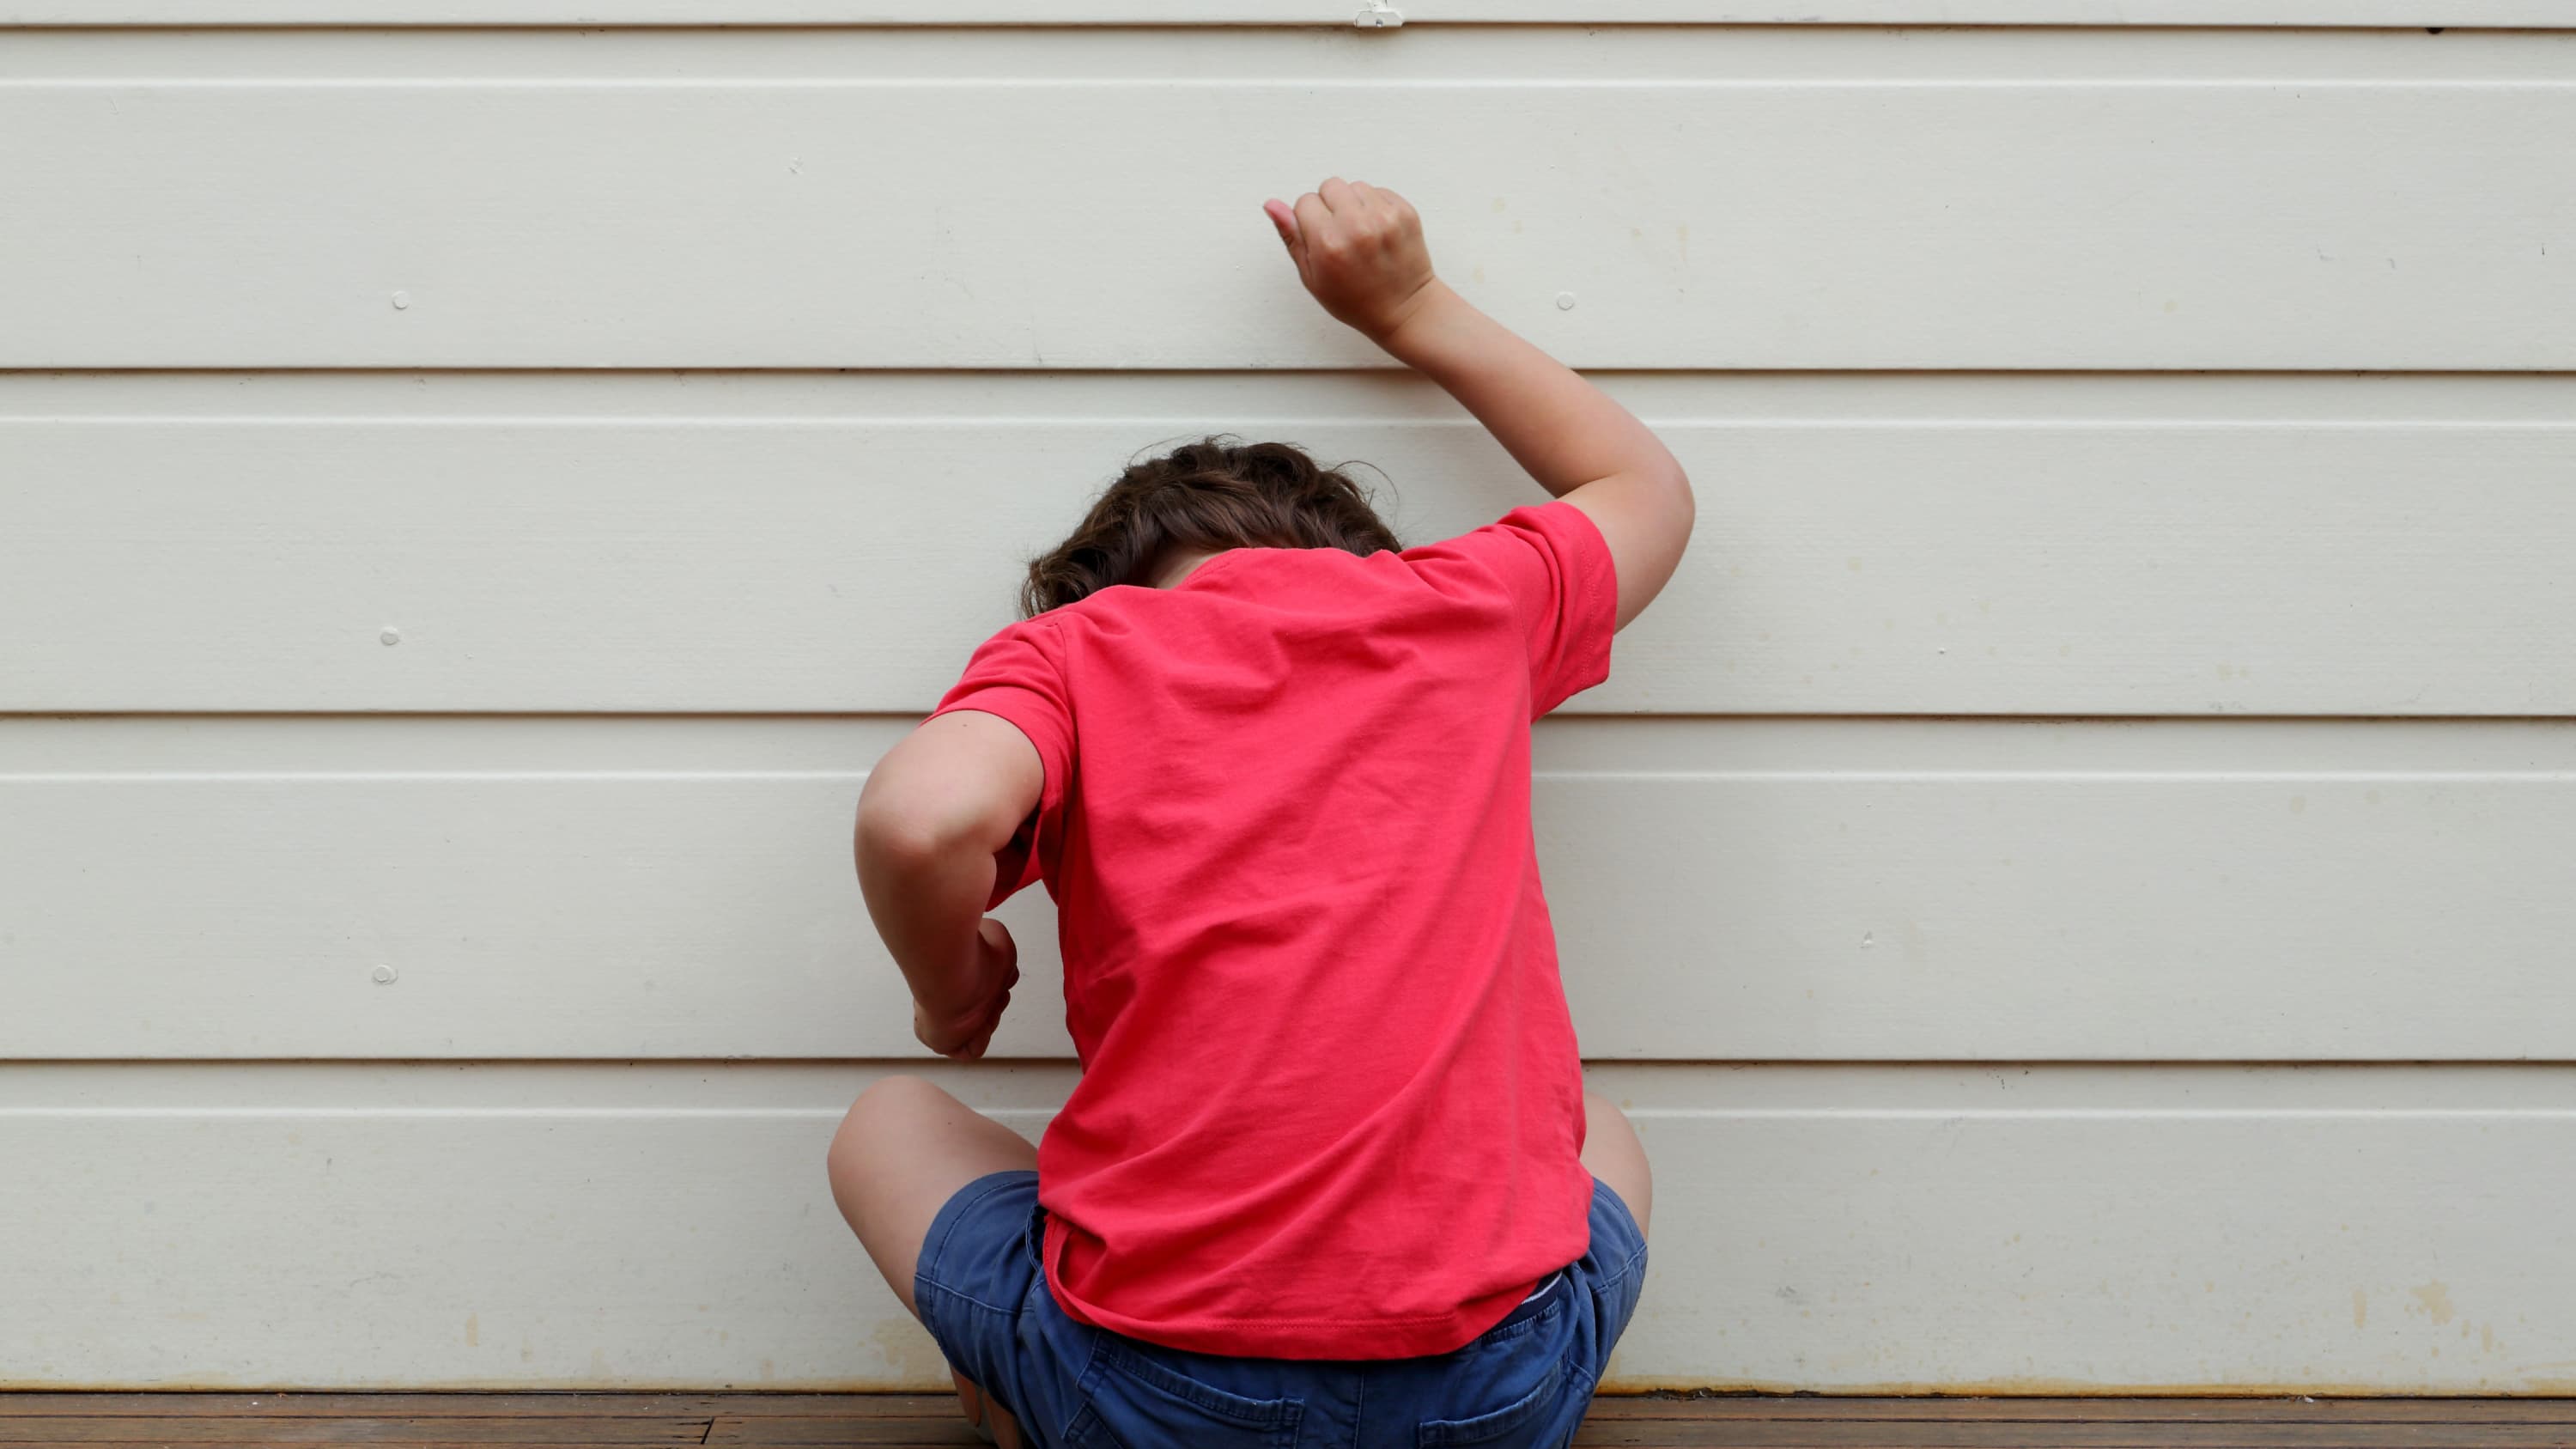 A child in a pink shirt who may have oppositional defiant disorder bangs on a wall.